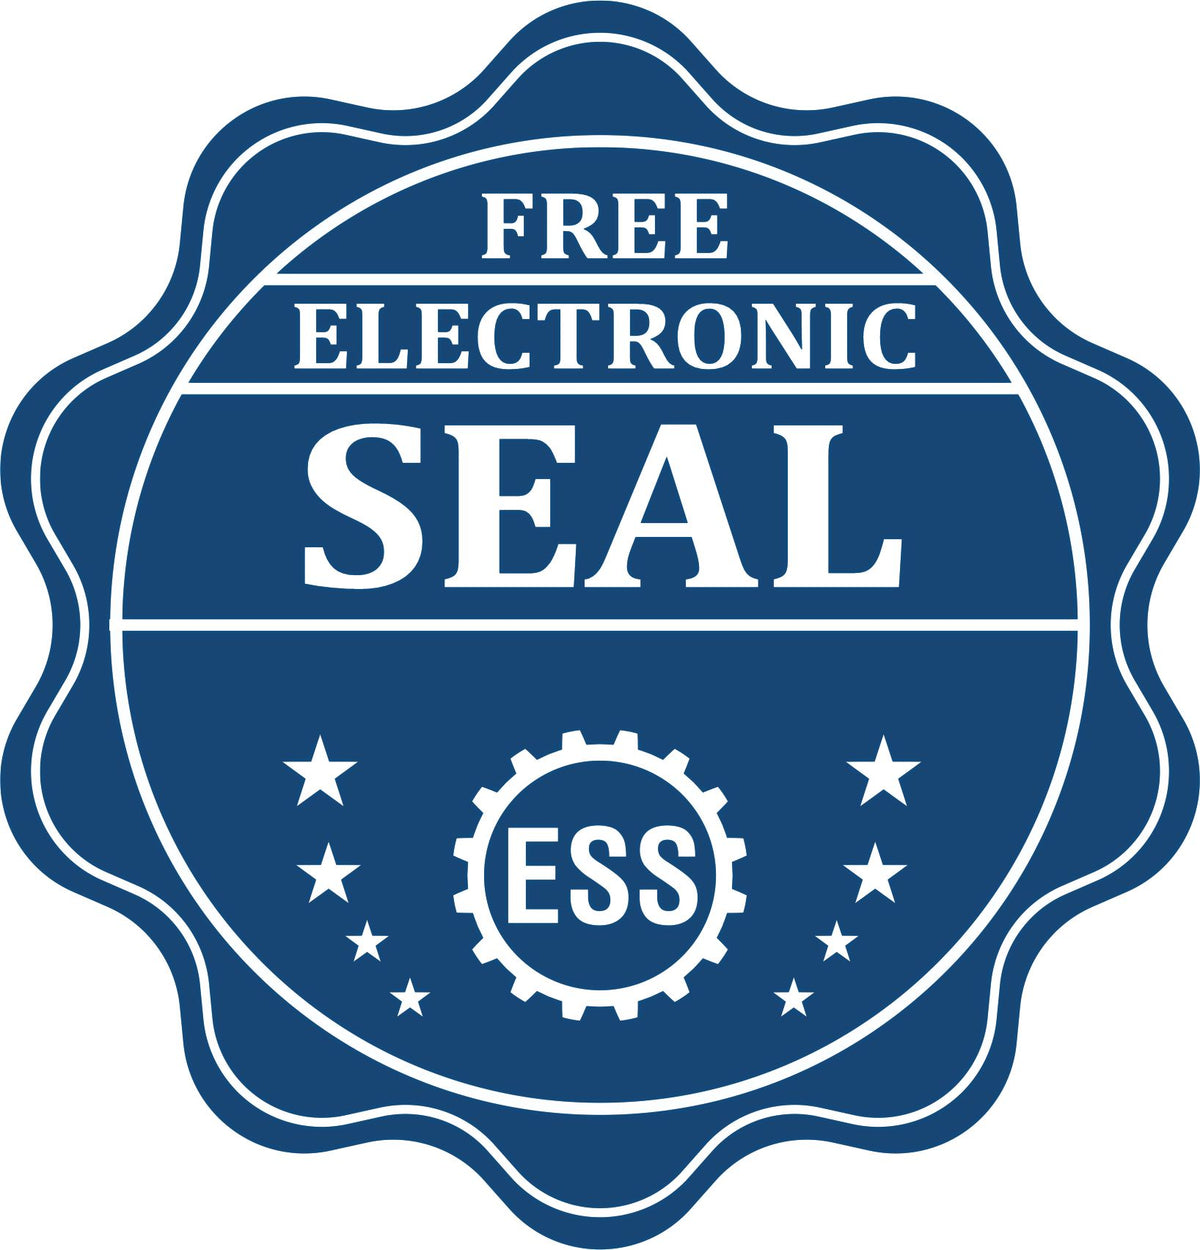 A badge showing a free electronic seal for the Premium MaxLight Pre-Inked Pennsylvania Engineering Stamp with stars and the ESS gear on the emblem.